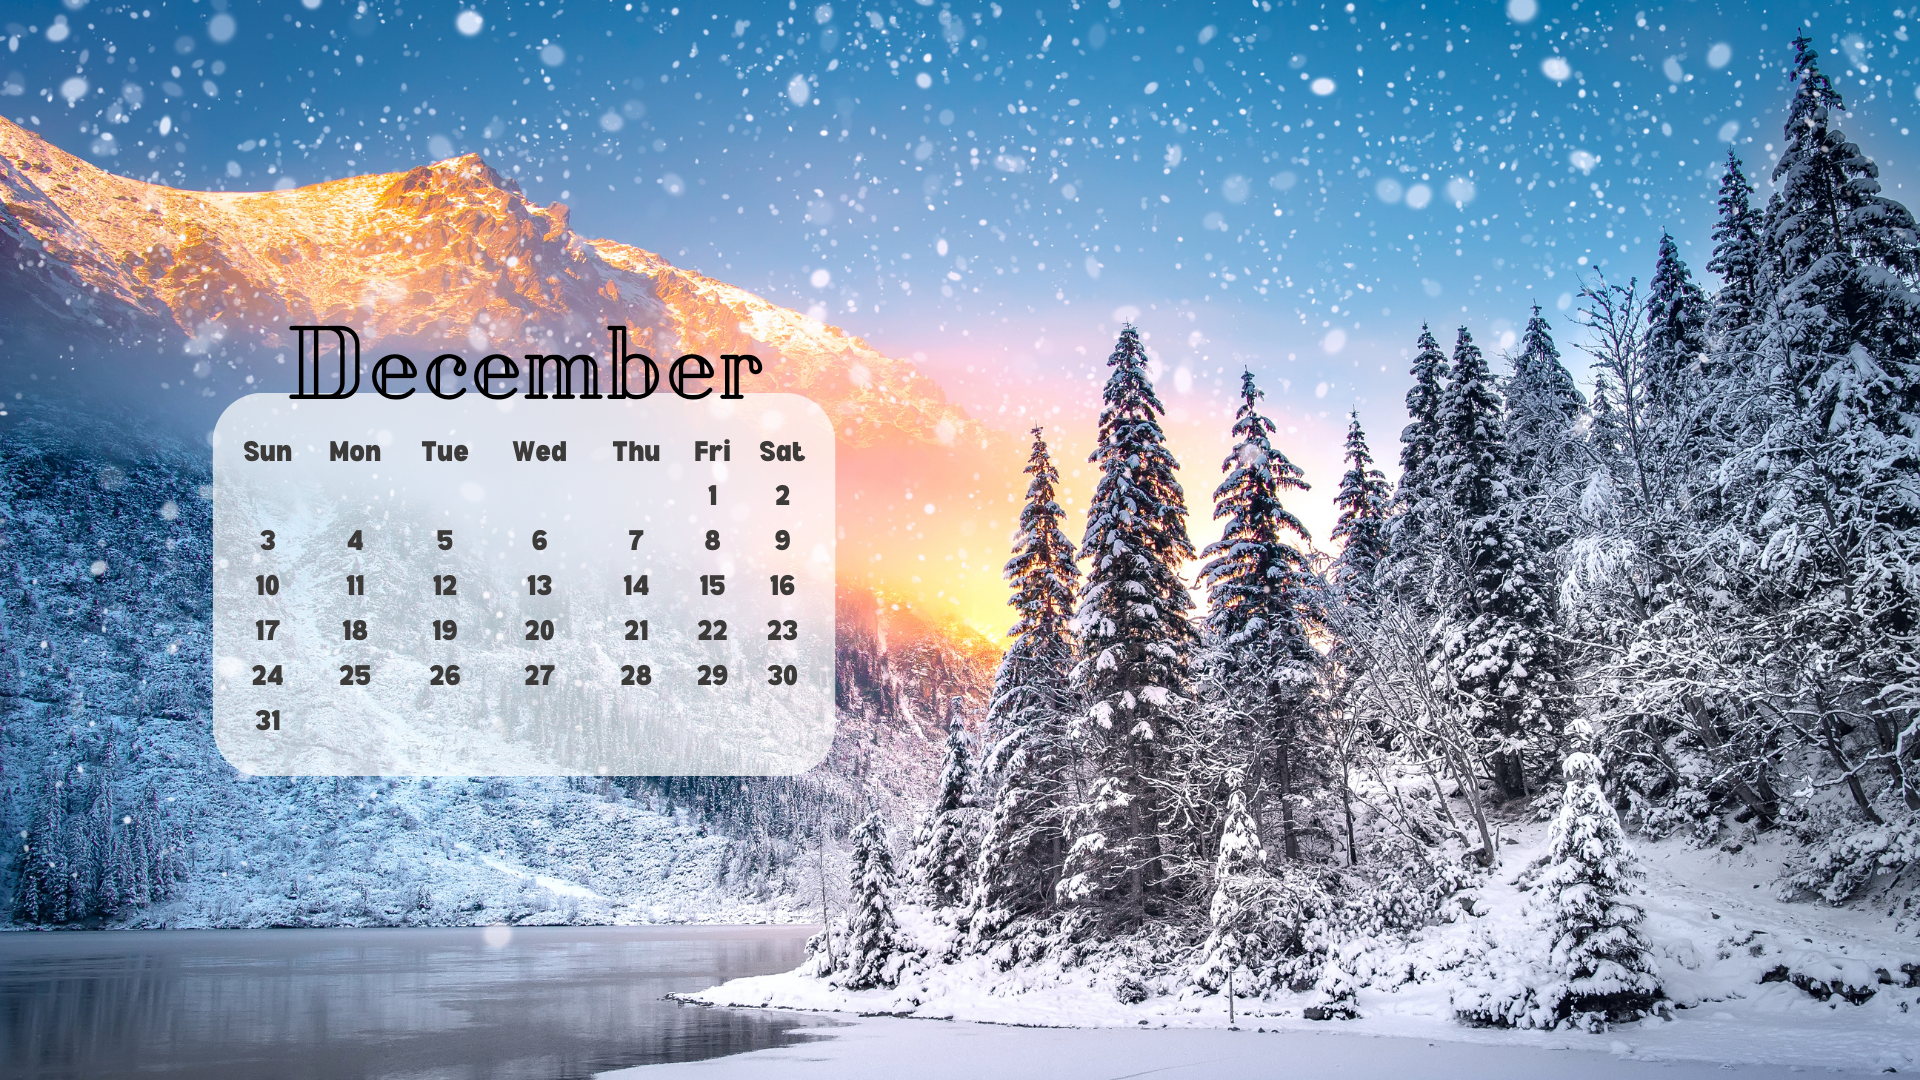 Free December 2023 Desktop Calendar Backgrounds; Here are your free December backgrounds for computers and laptops. Tech freebies for this month!